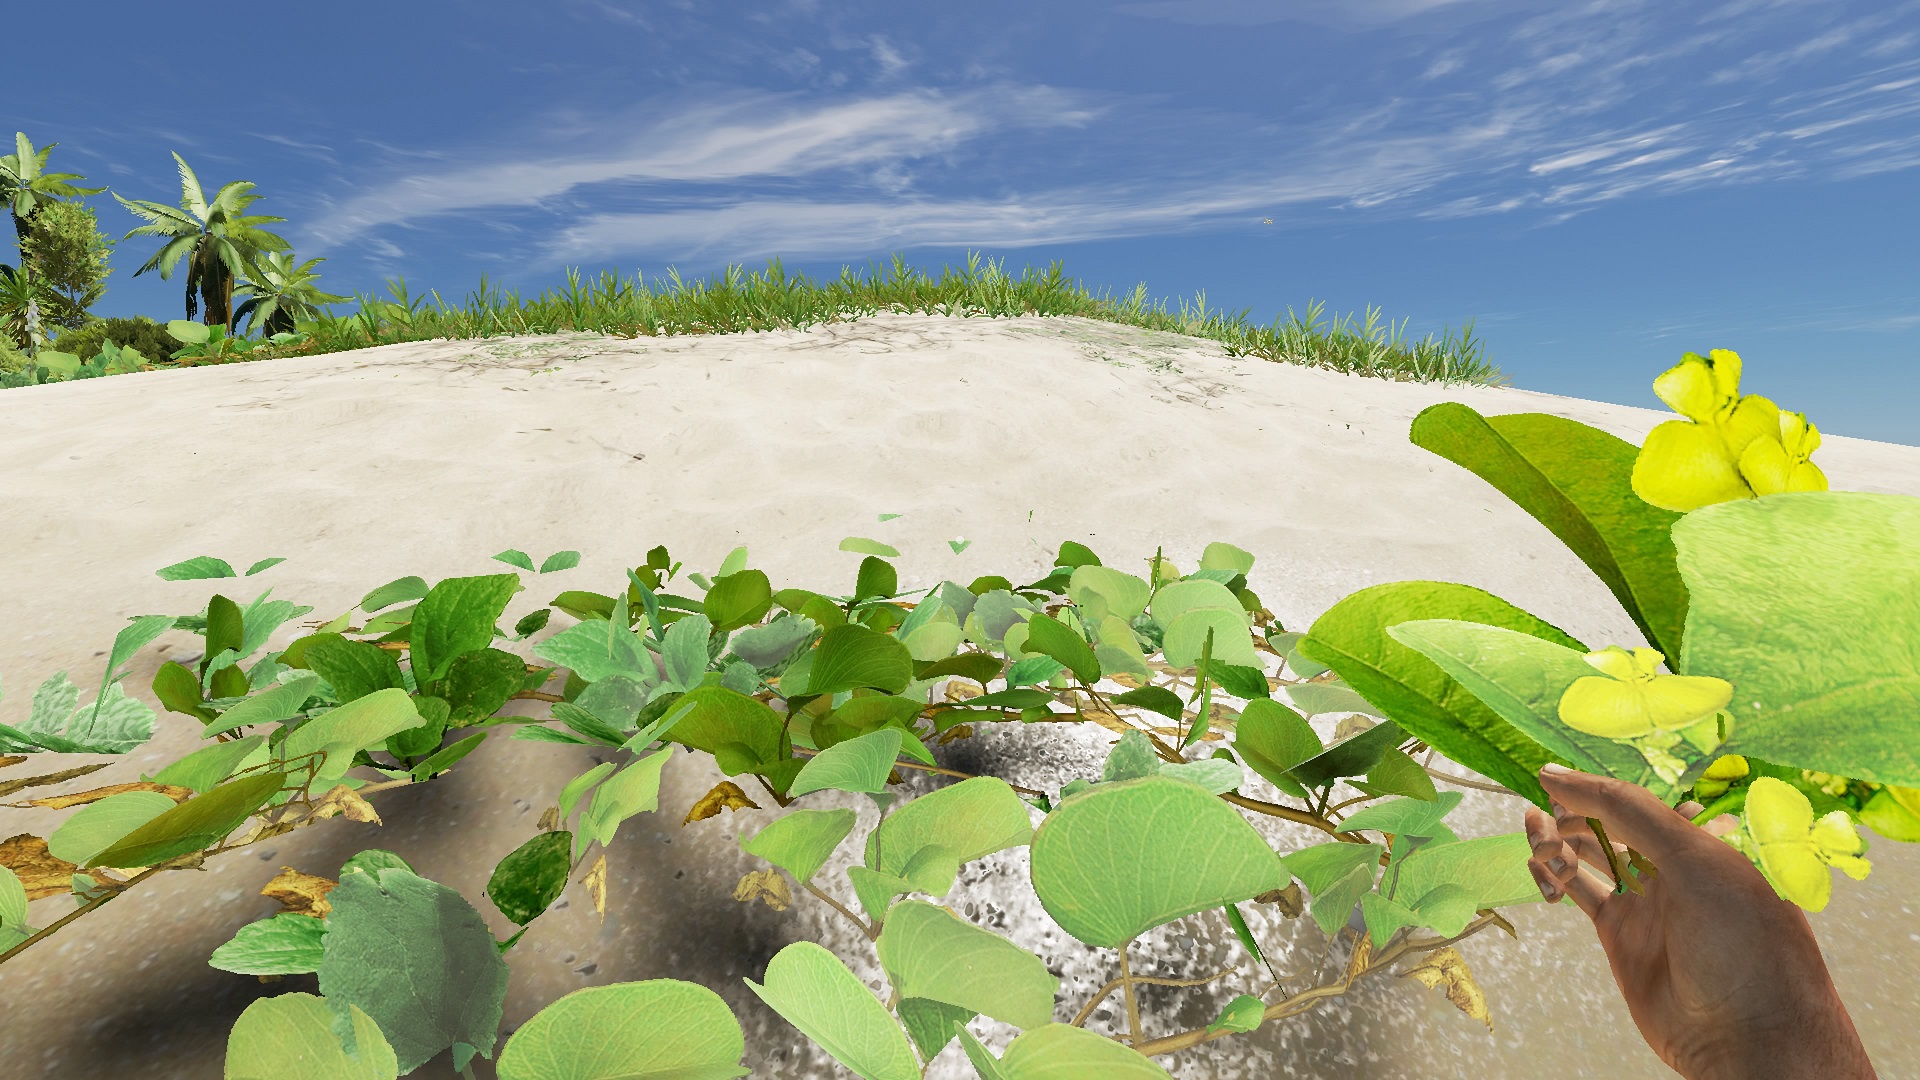 The Best Games To Play If You Like Stranded Deep